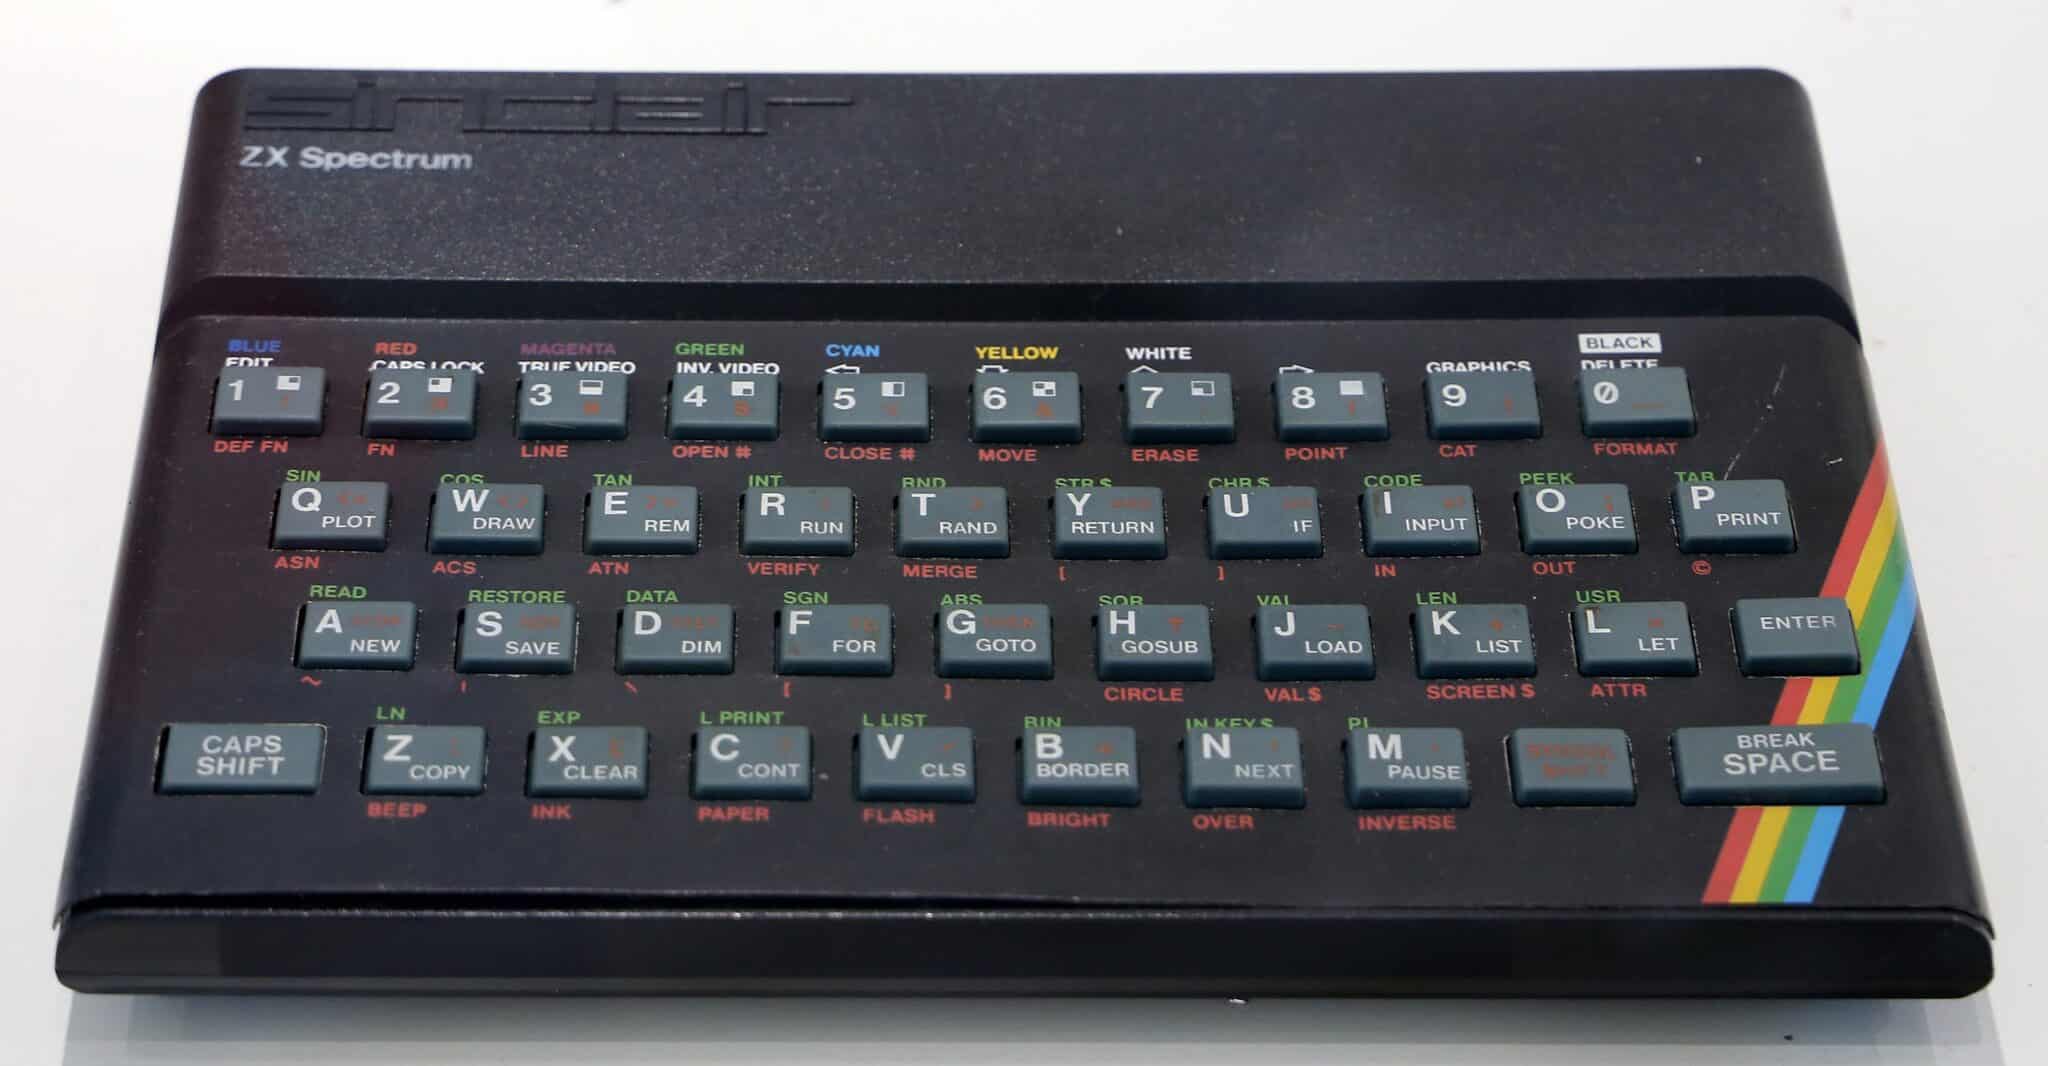 The Sinclair ZX Spectrum, initially released in 1982